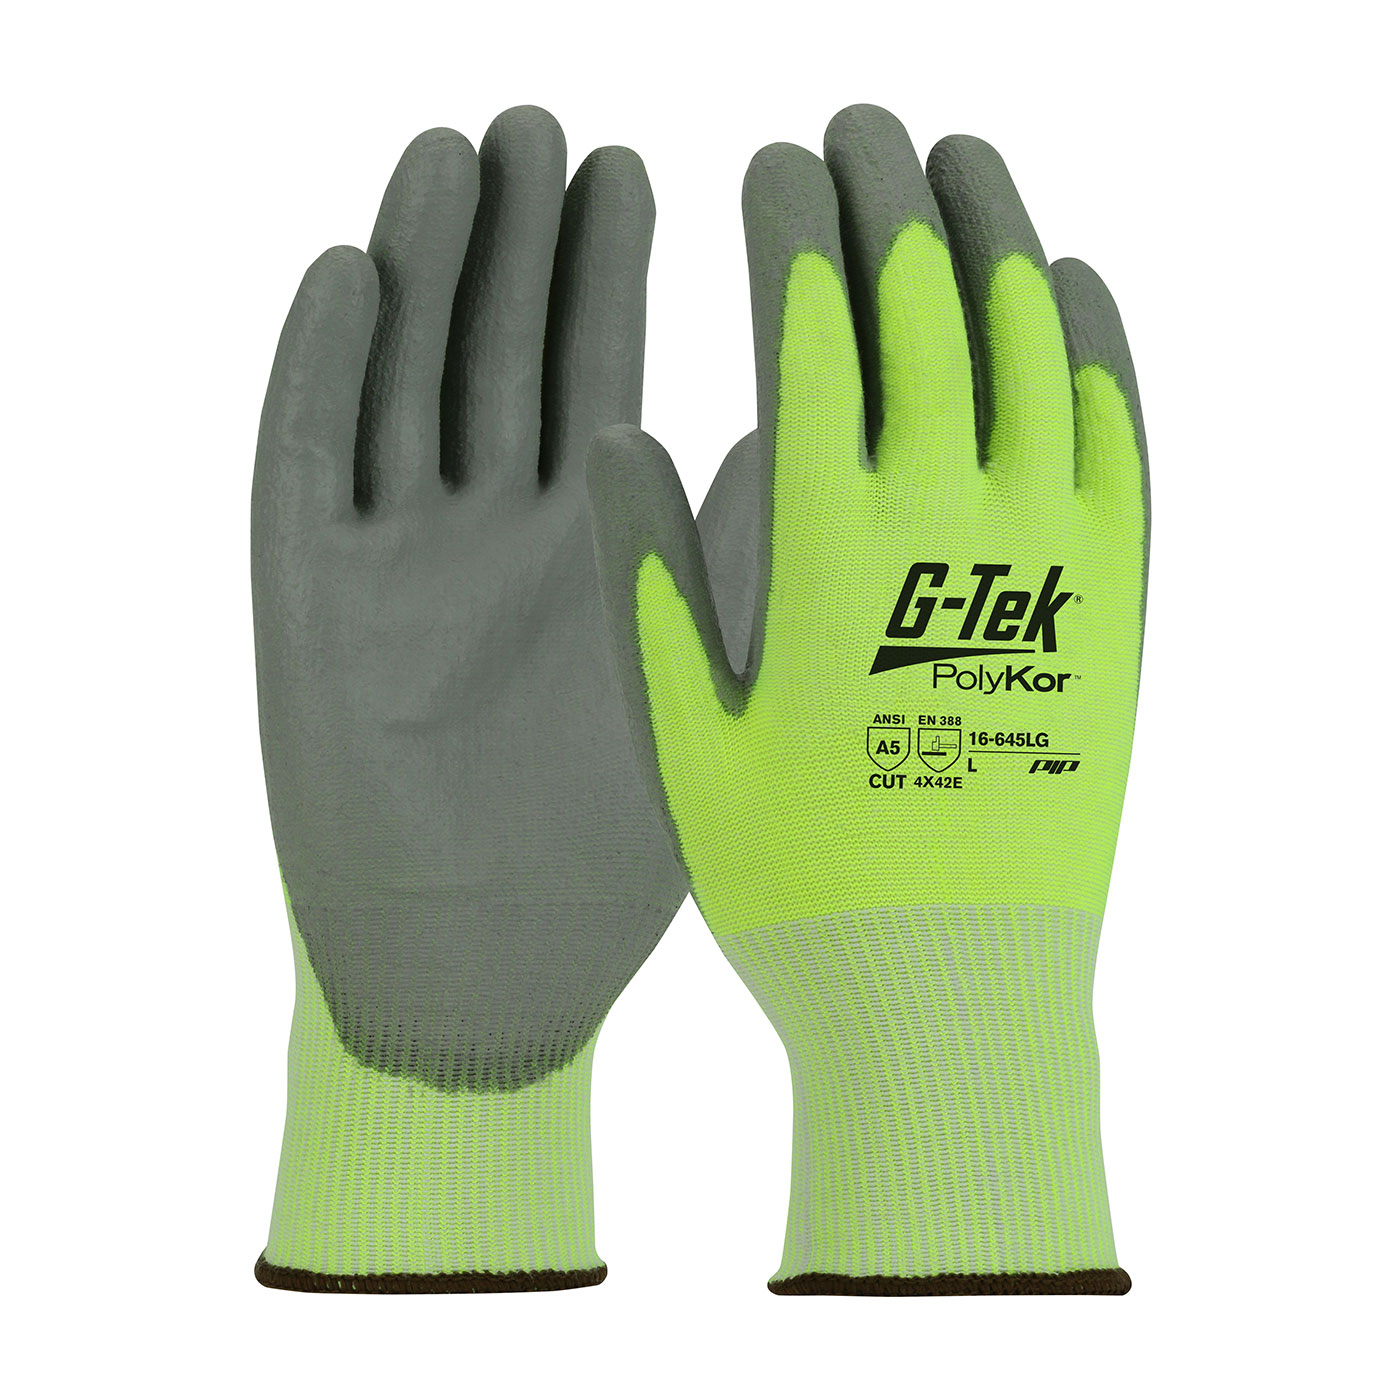 PIP 16-645LG/XXL G-Tek PolyKor Seamless Knit PolyKor Blended Glove with Polyurethane Coated Smooth Grip on Palm & Fingers - 2X-Large PID-16645LGXXL